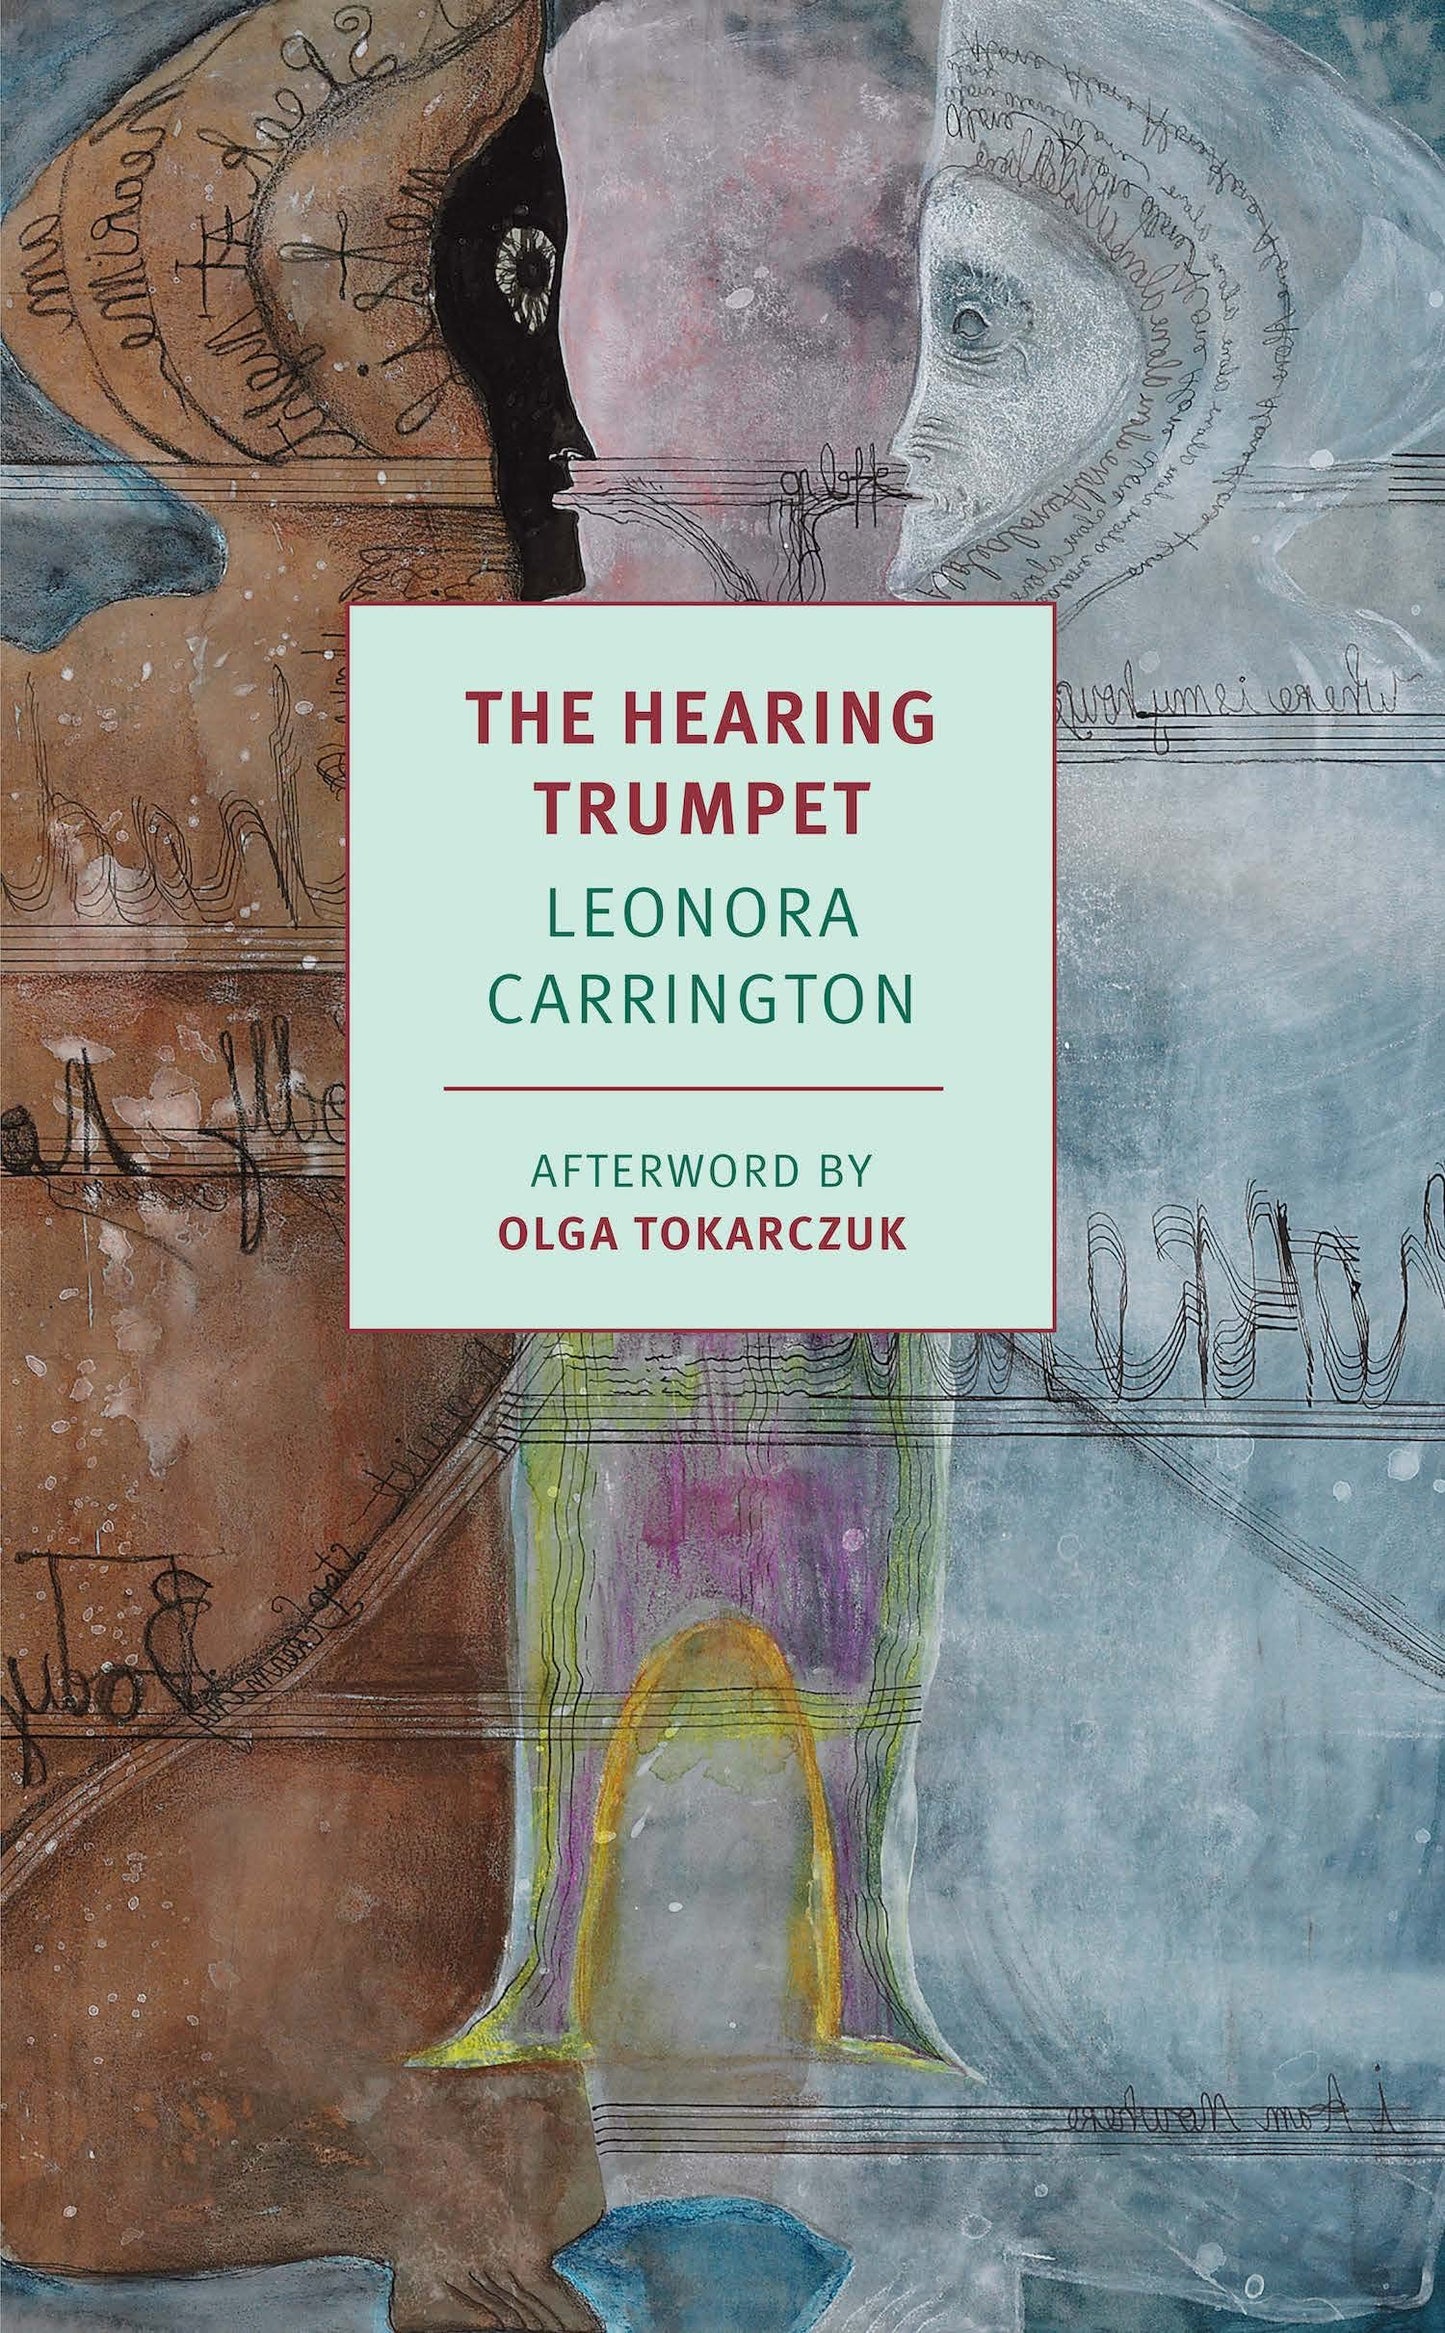 The Hearing Trumpet, by Leonora Carrington